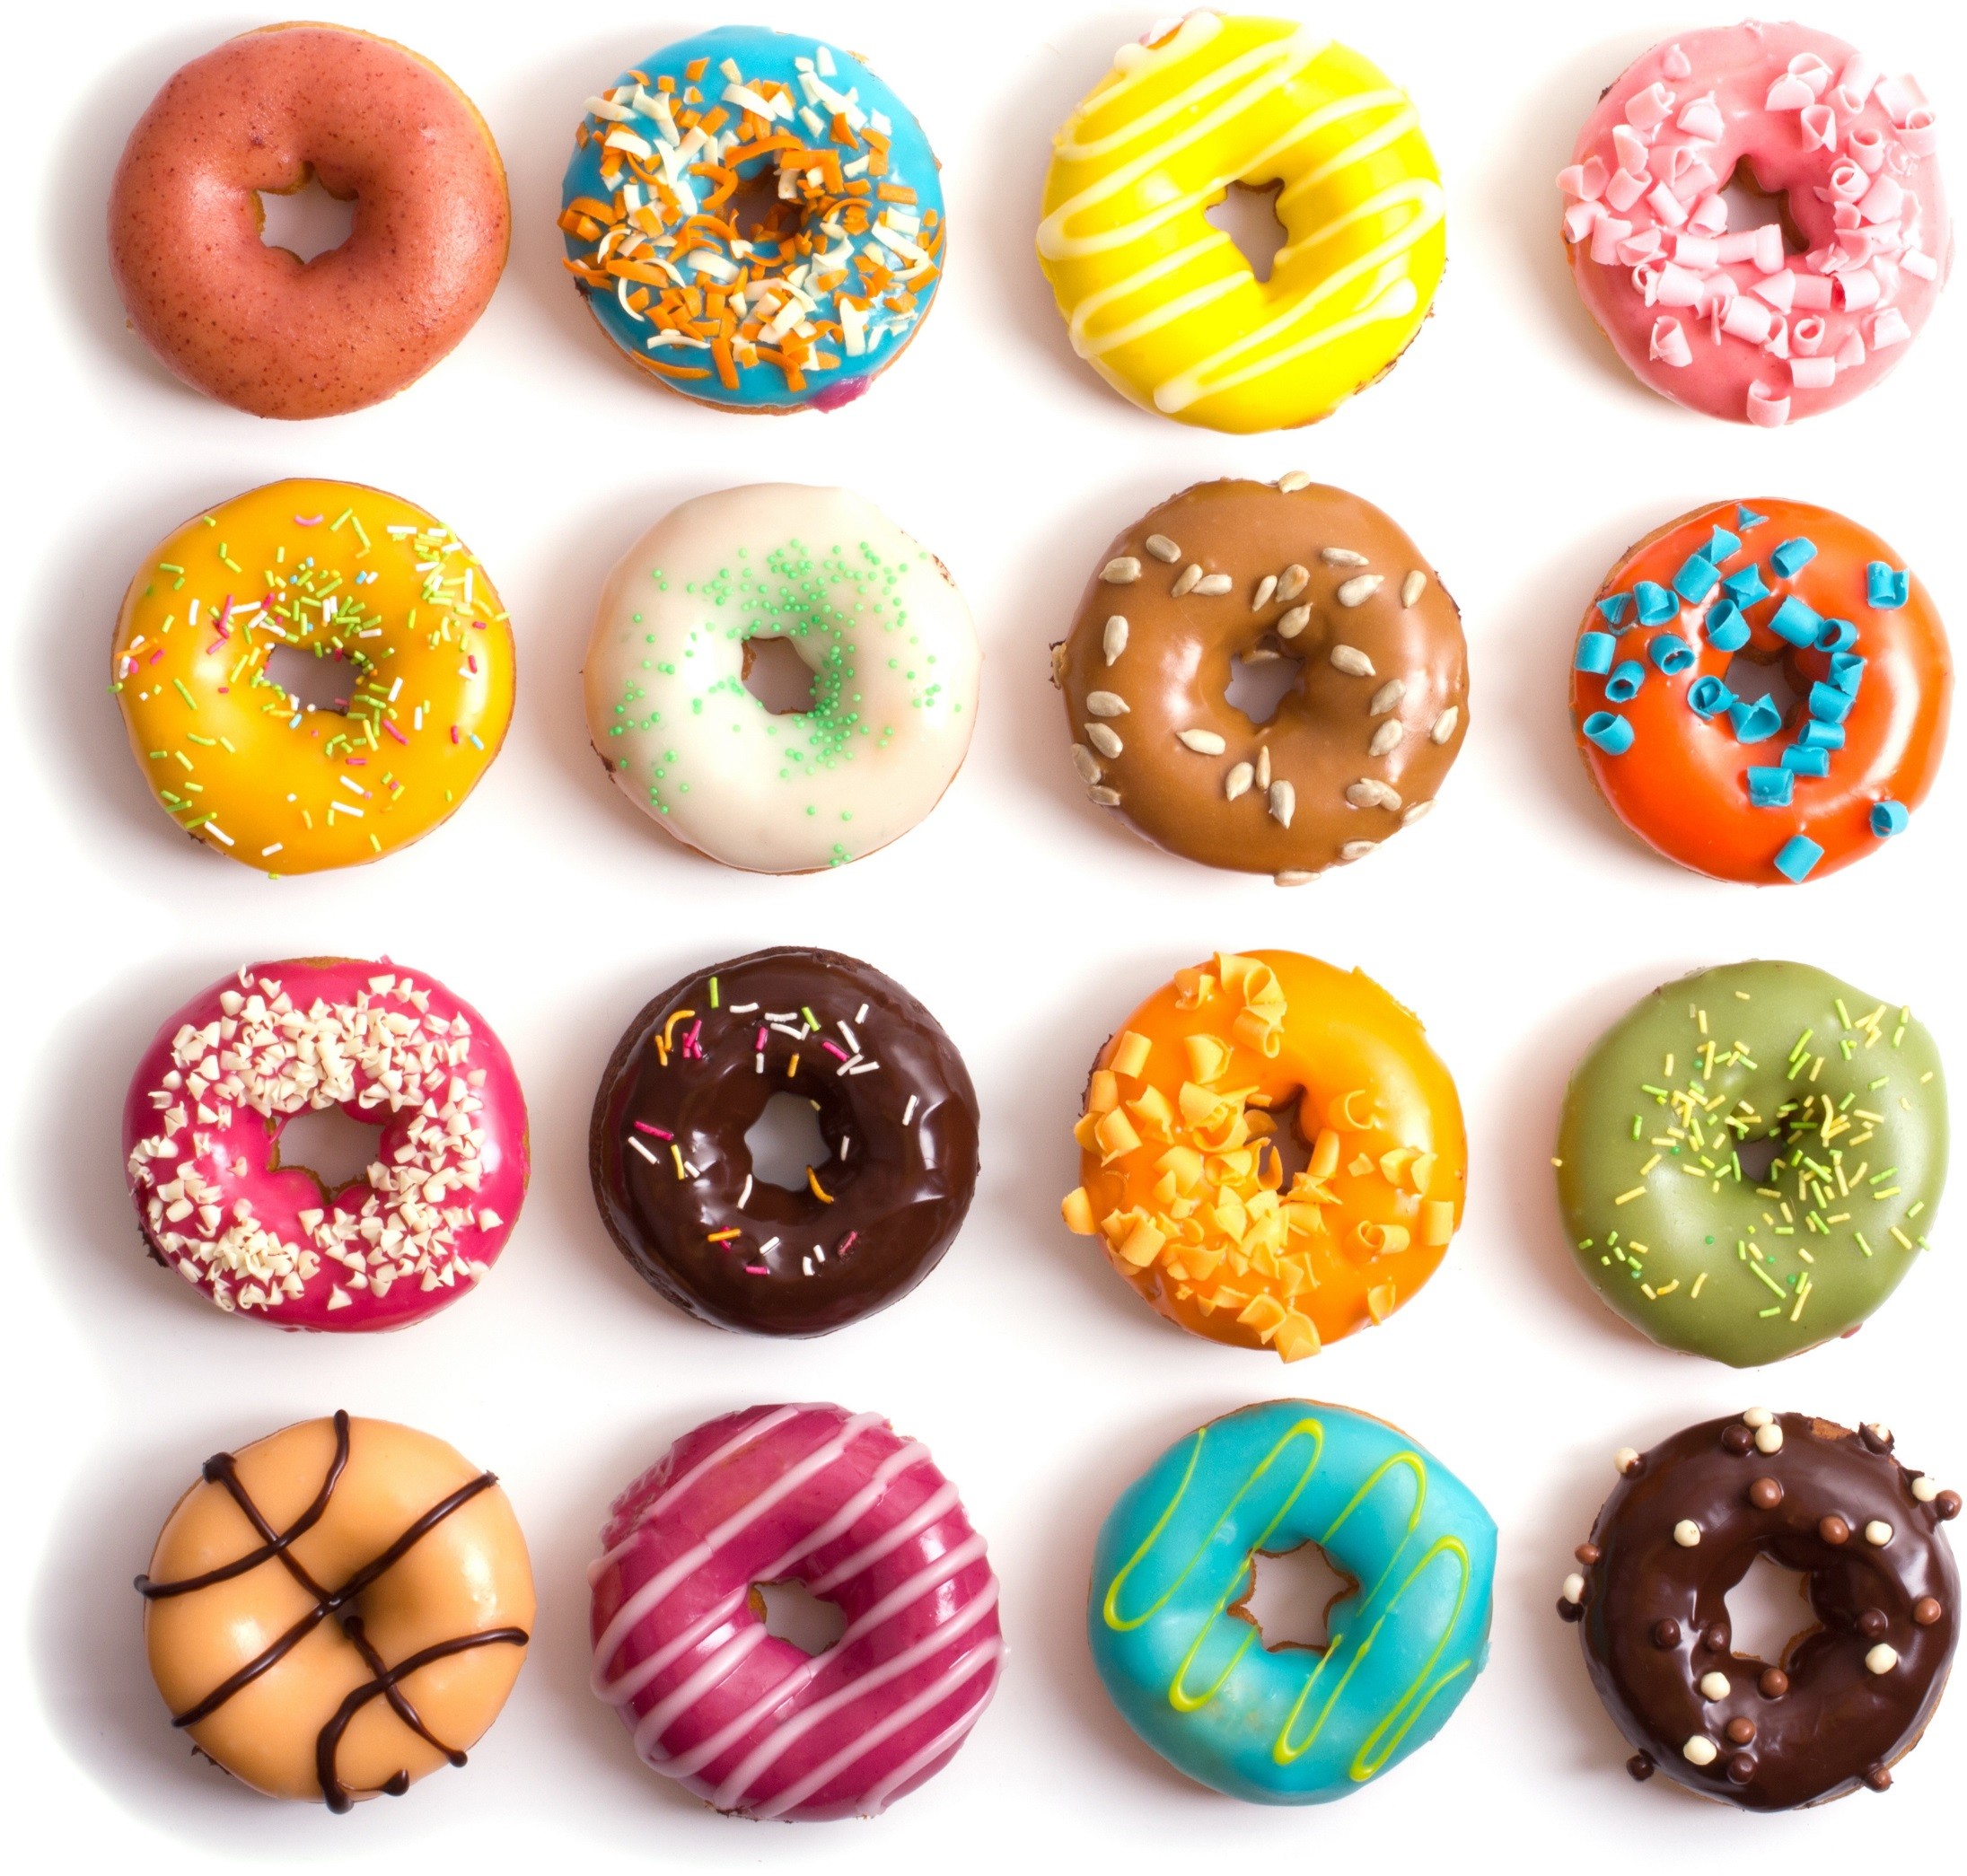 General 2191x2090 donut food sprinkles sweets colorful top view simple background closeup